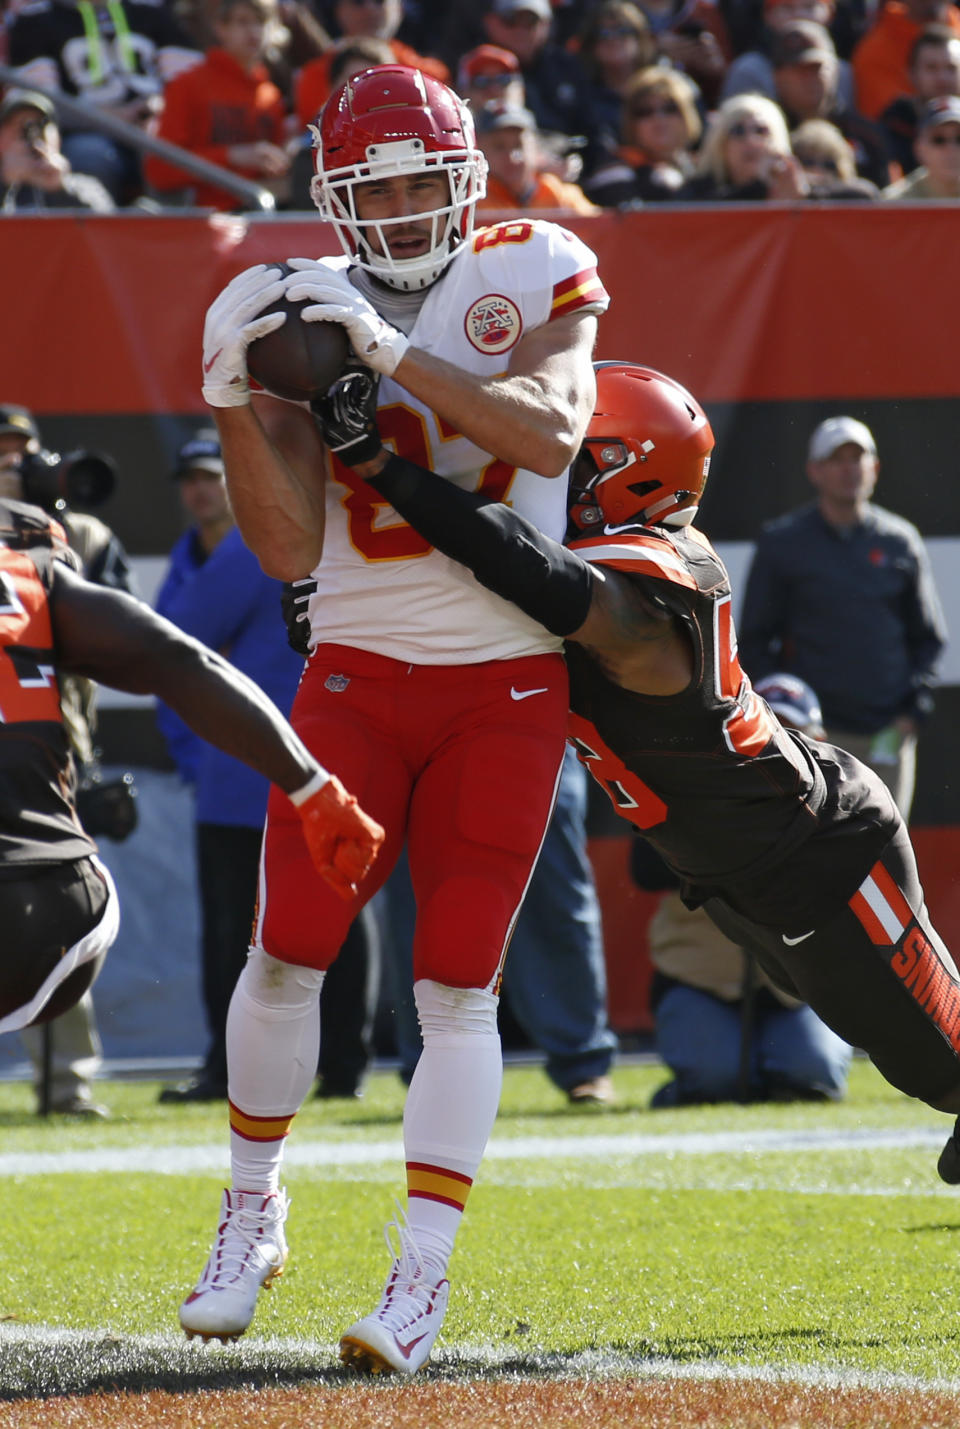 Kansas City Chiefs tight end Travis Kelce (87) scores a touchdown as Cleveland Browns linebacker Christian Kirksey (58) makes the tackle after an 11-yard pass during the first half of an NFL football game against the Cleveland Browns, Sunday, Nov. 4, 2018, in Cleveland. (AP Photo/Ron Schwane)